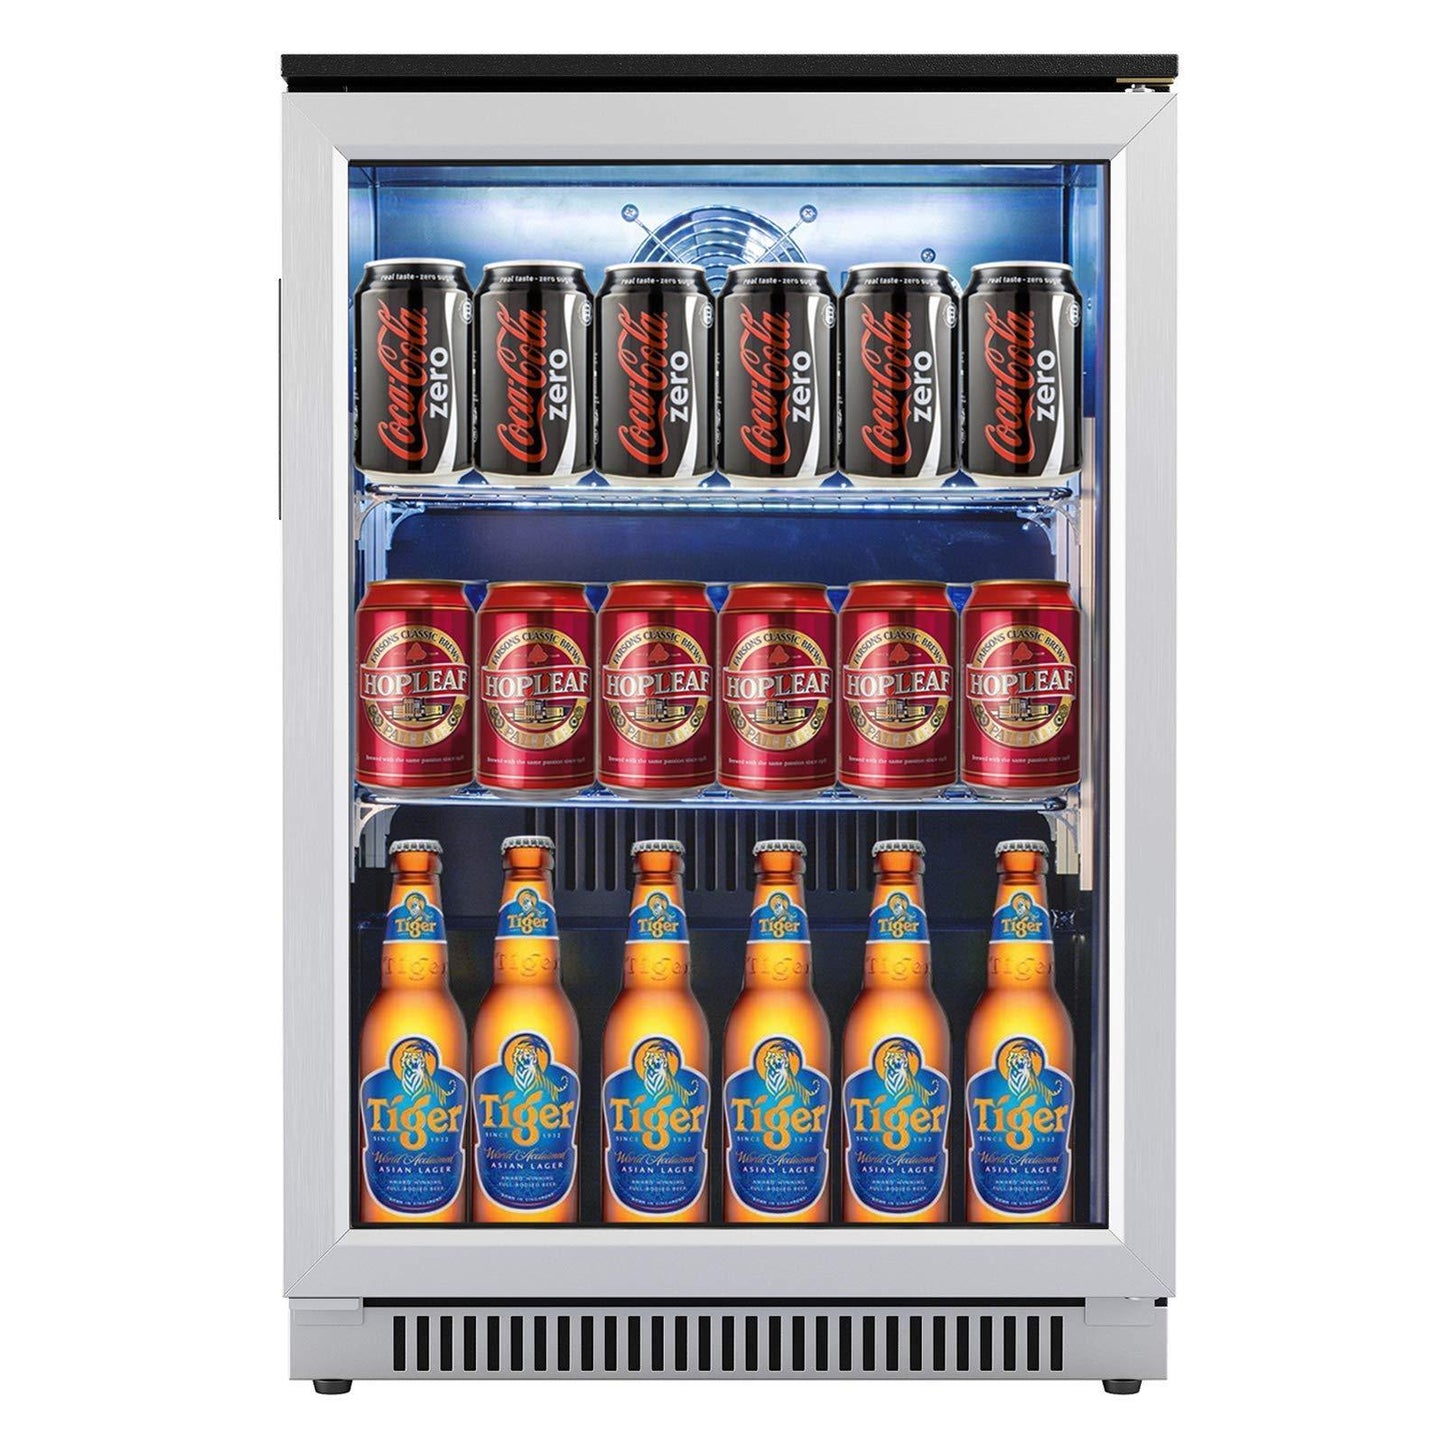 Advanics 20 Inch Wide Built in Beverage Refrigerator with Clear Glass Front Door, 120 Can Under Counter Cabinet Soda Beer Drink Cooler Center Large, Undercounter Bar Display Fridge for Man Cave Garage - CookCave